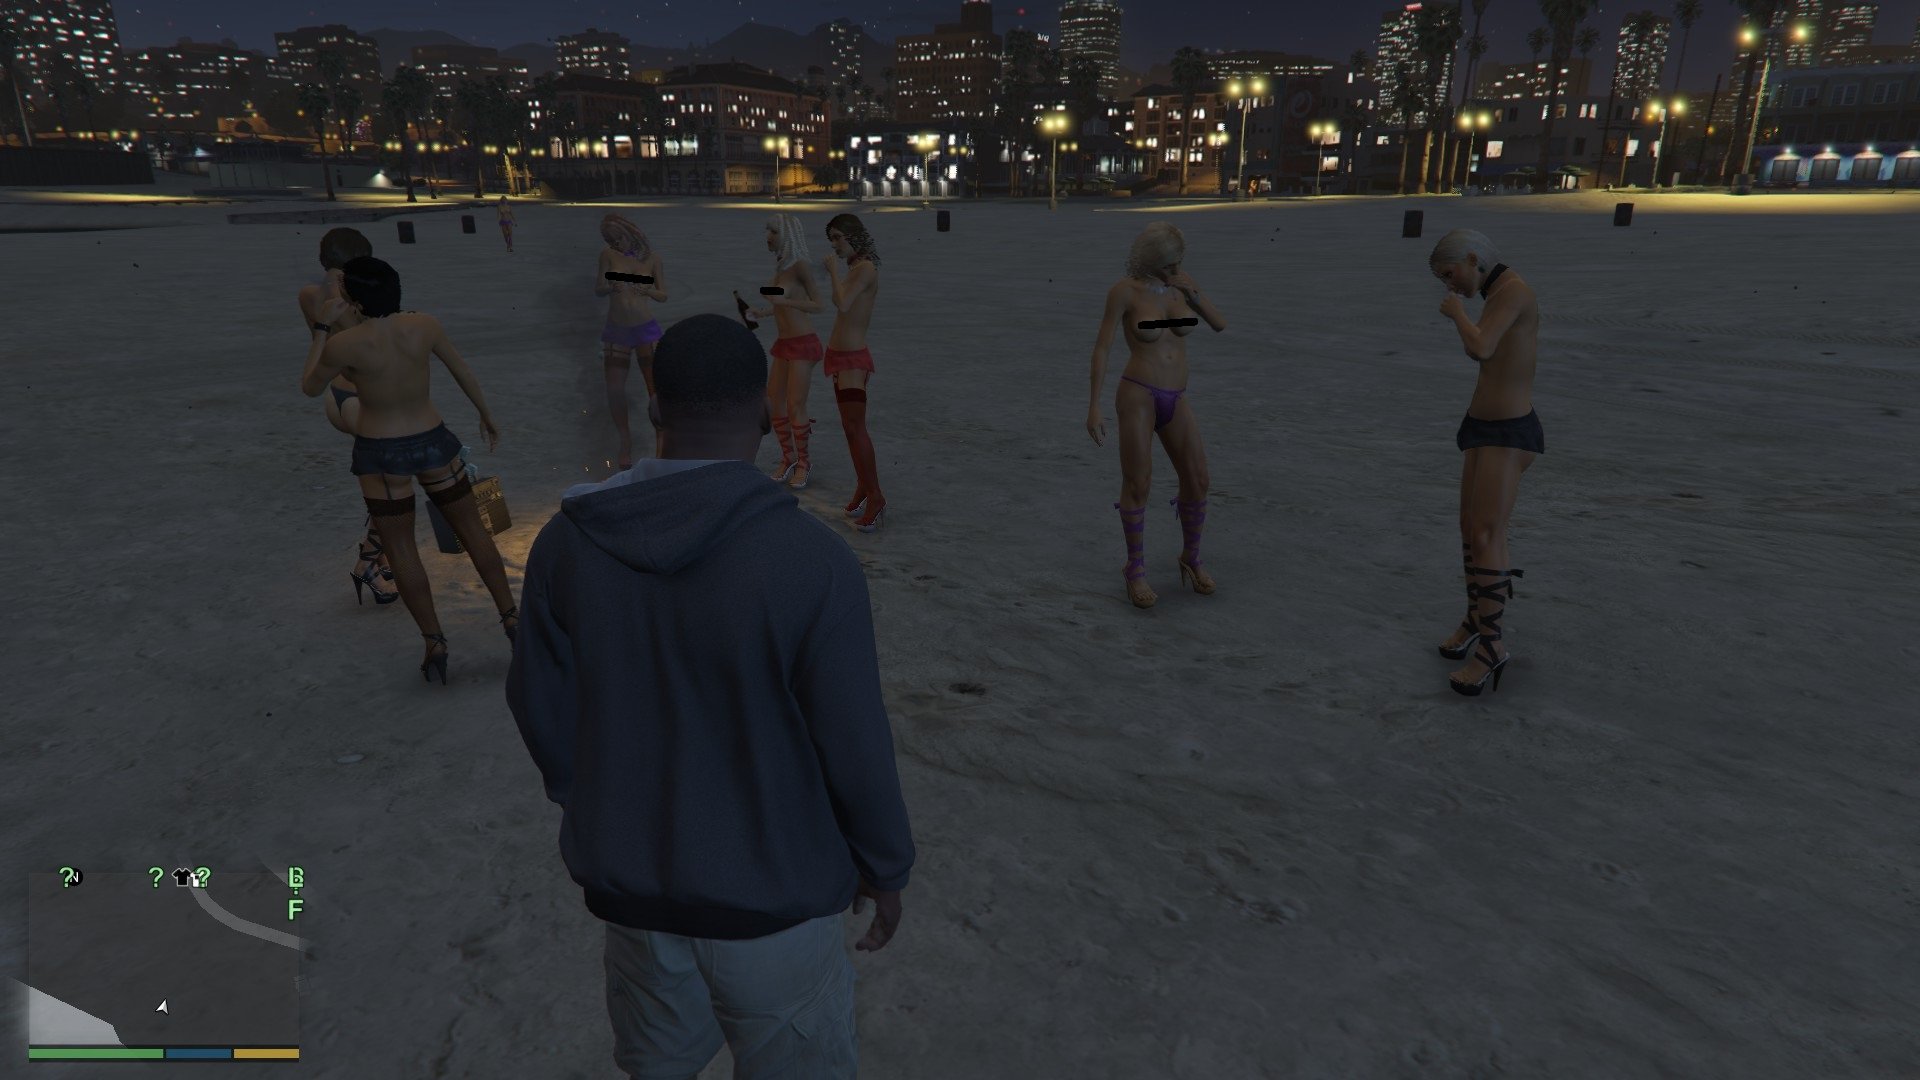 anamika pandey recommends Grand Theft Auto V Nudity